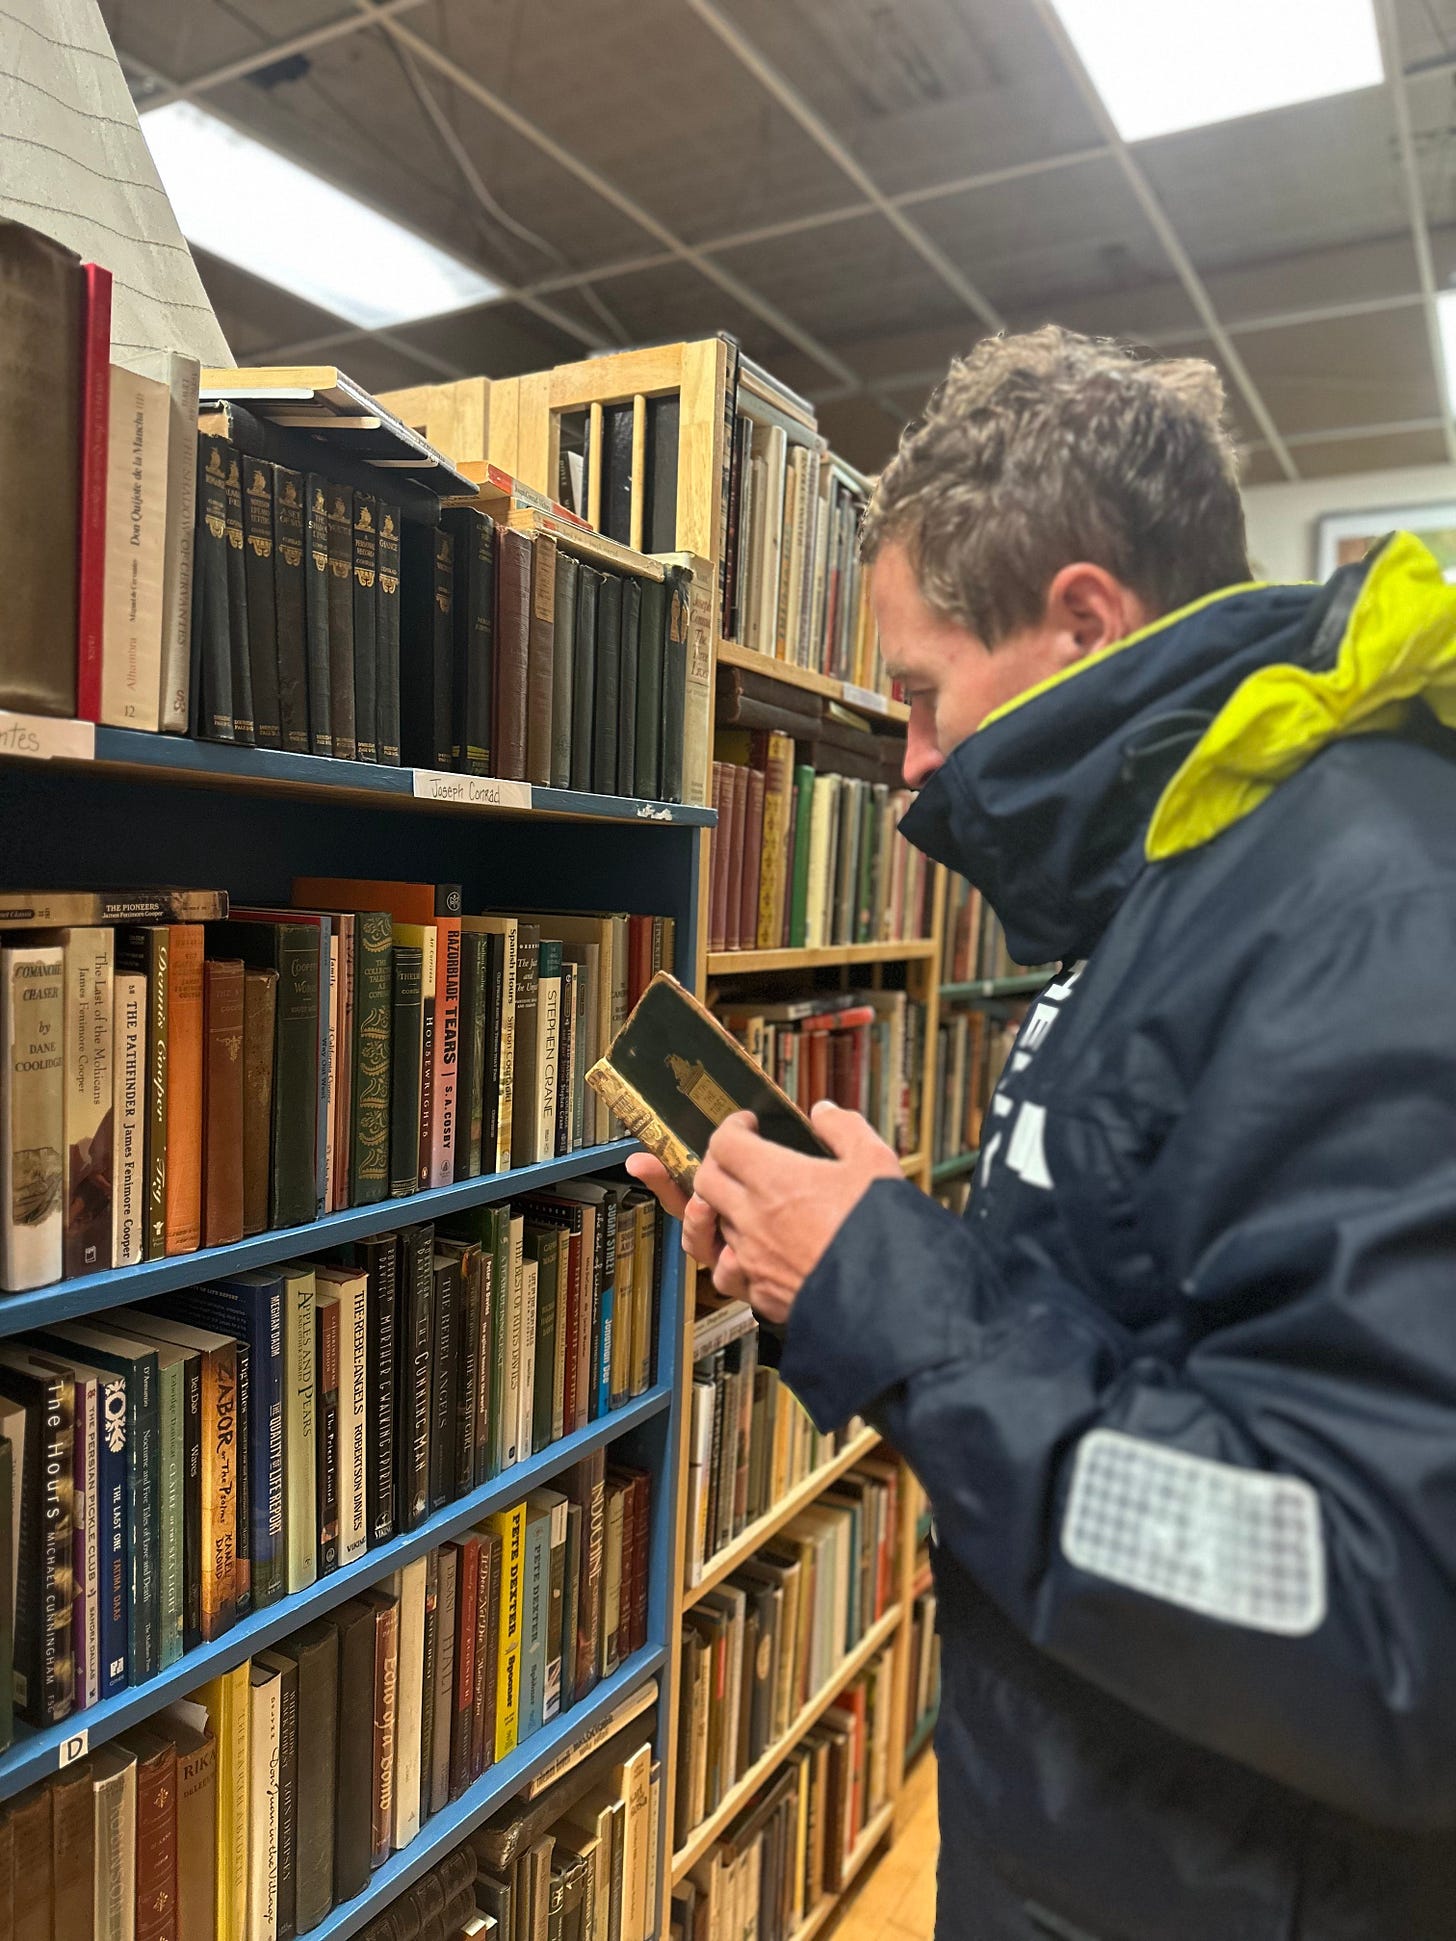 A man in rain gear is leafing a used book in a bookstore